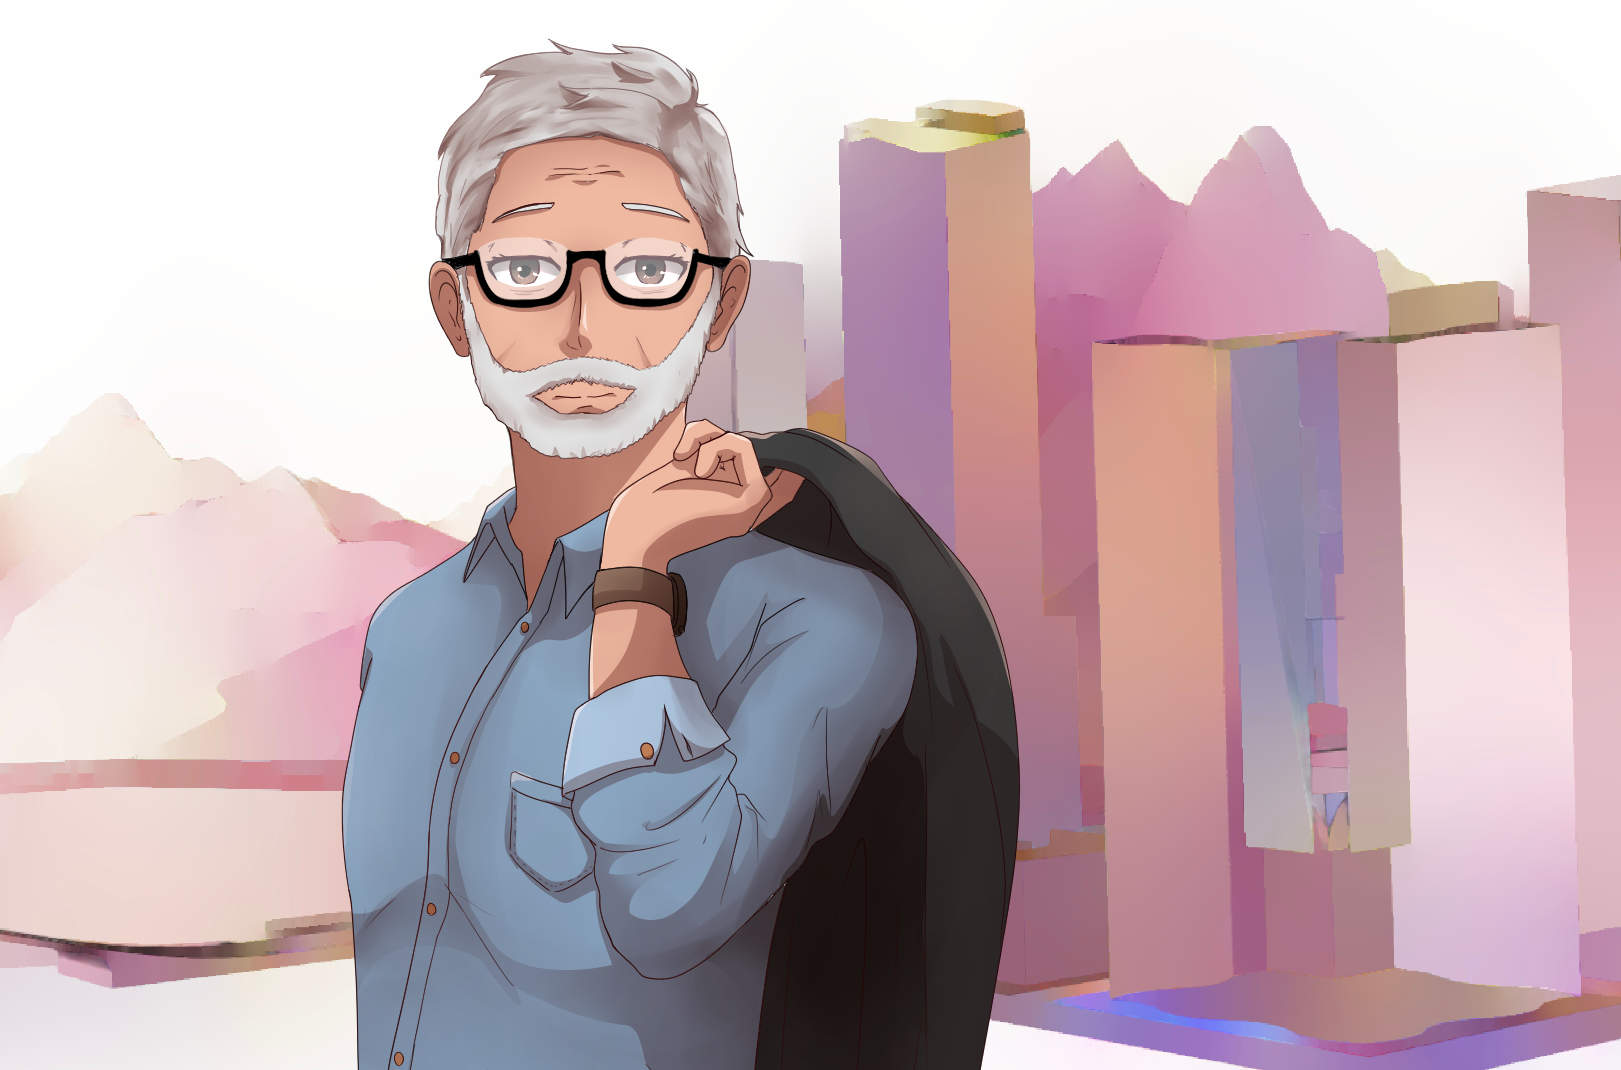 Manga style old man standing defiantly in front of a cityscape